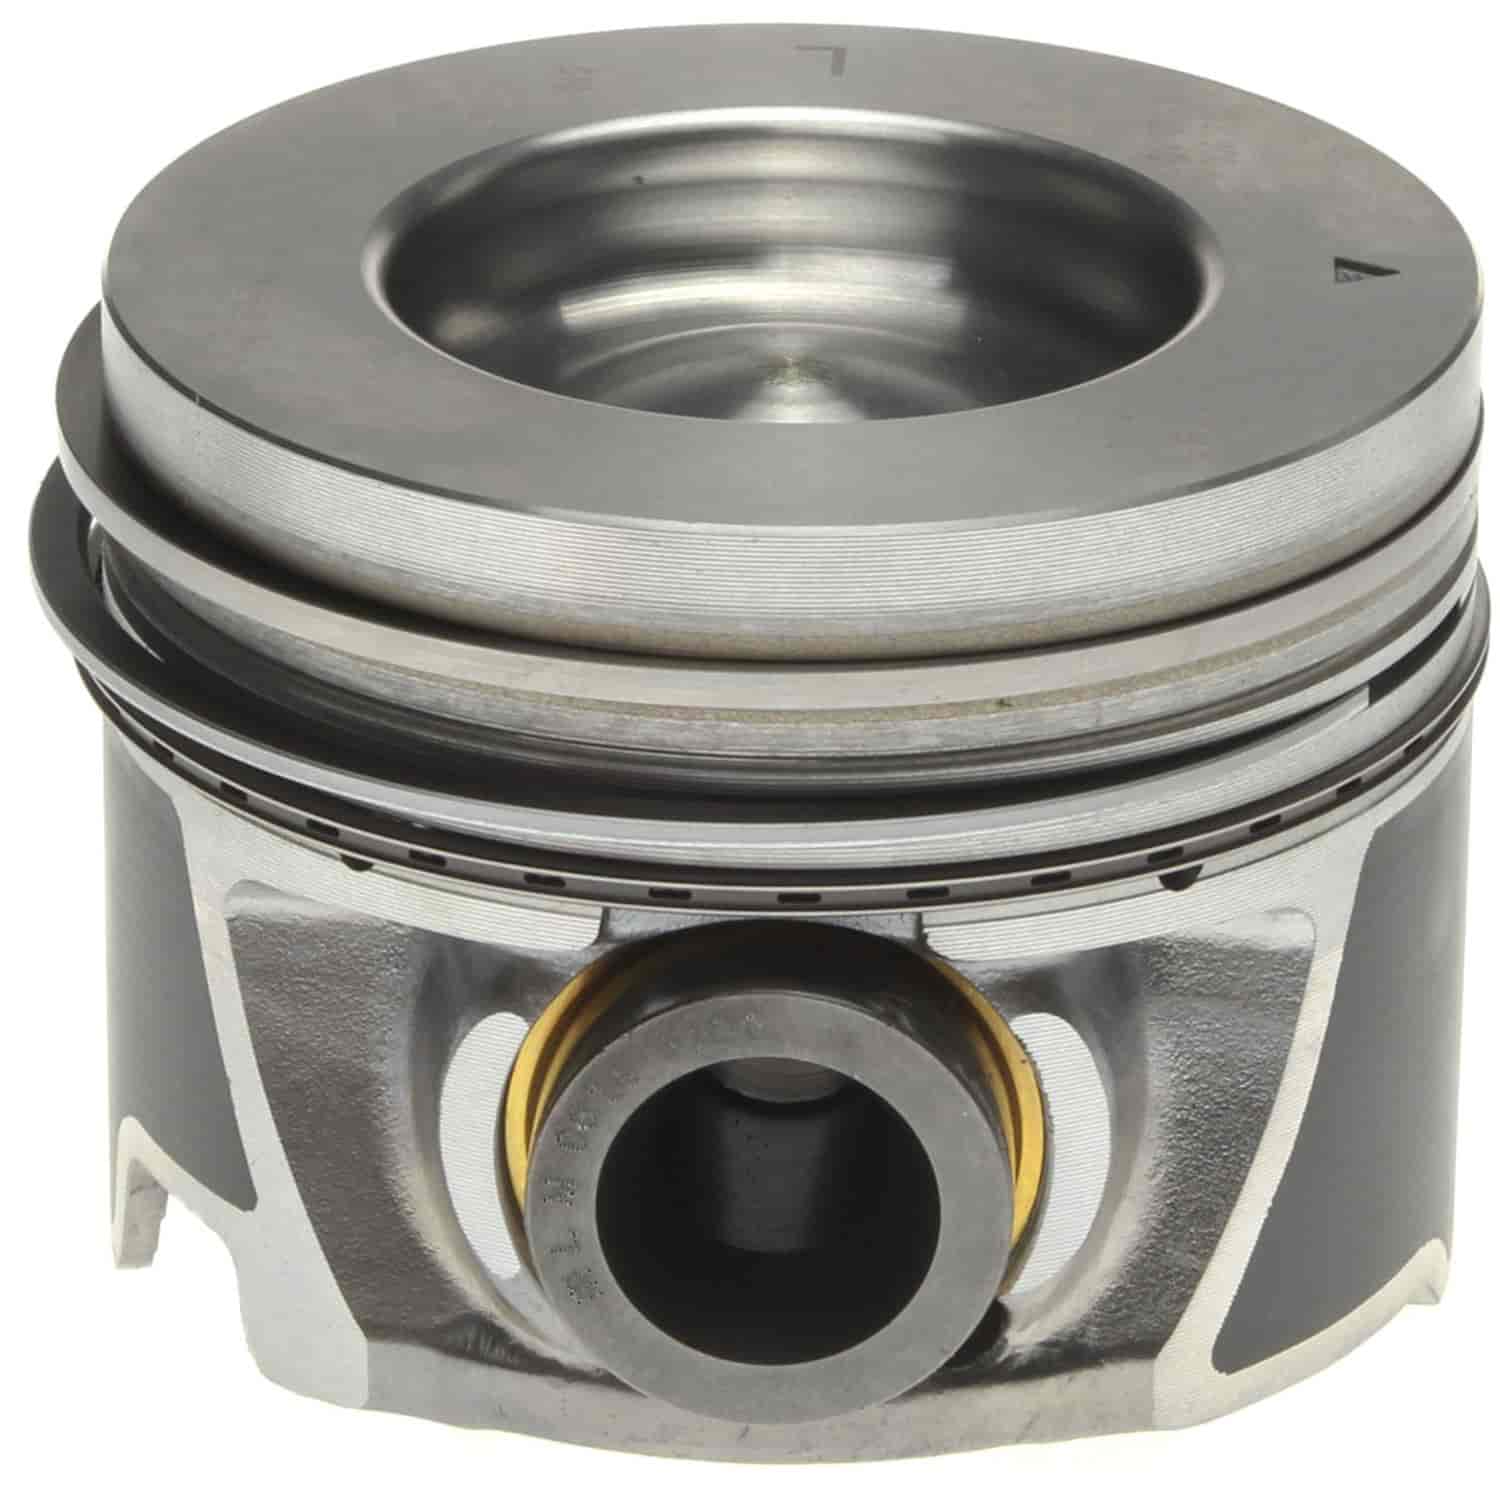 Piston and Rings Set 2006-2010 Chevy/GMC Duramax Diesel V8 6.6L Left Bank with 4.055" Bore (Standard)